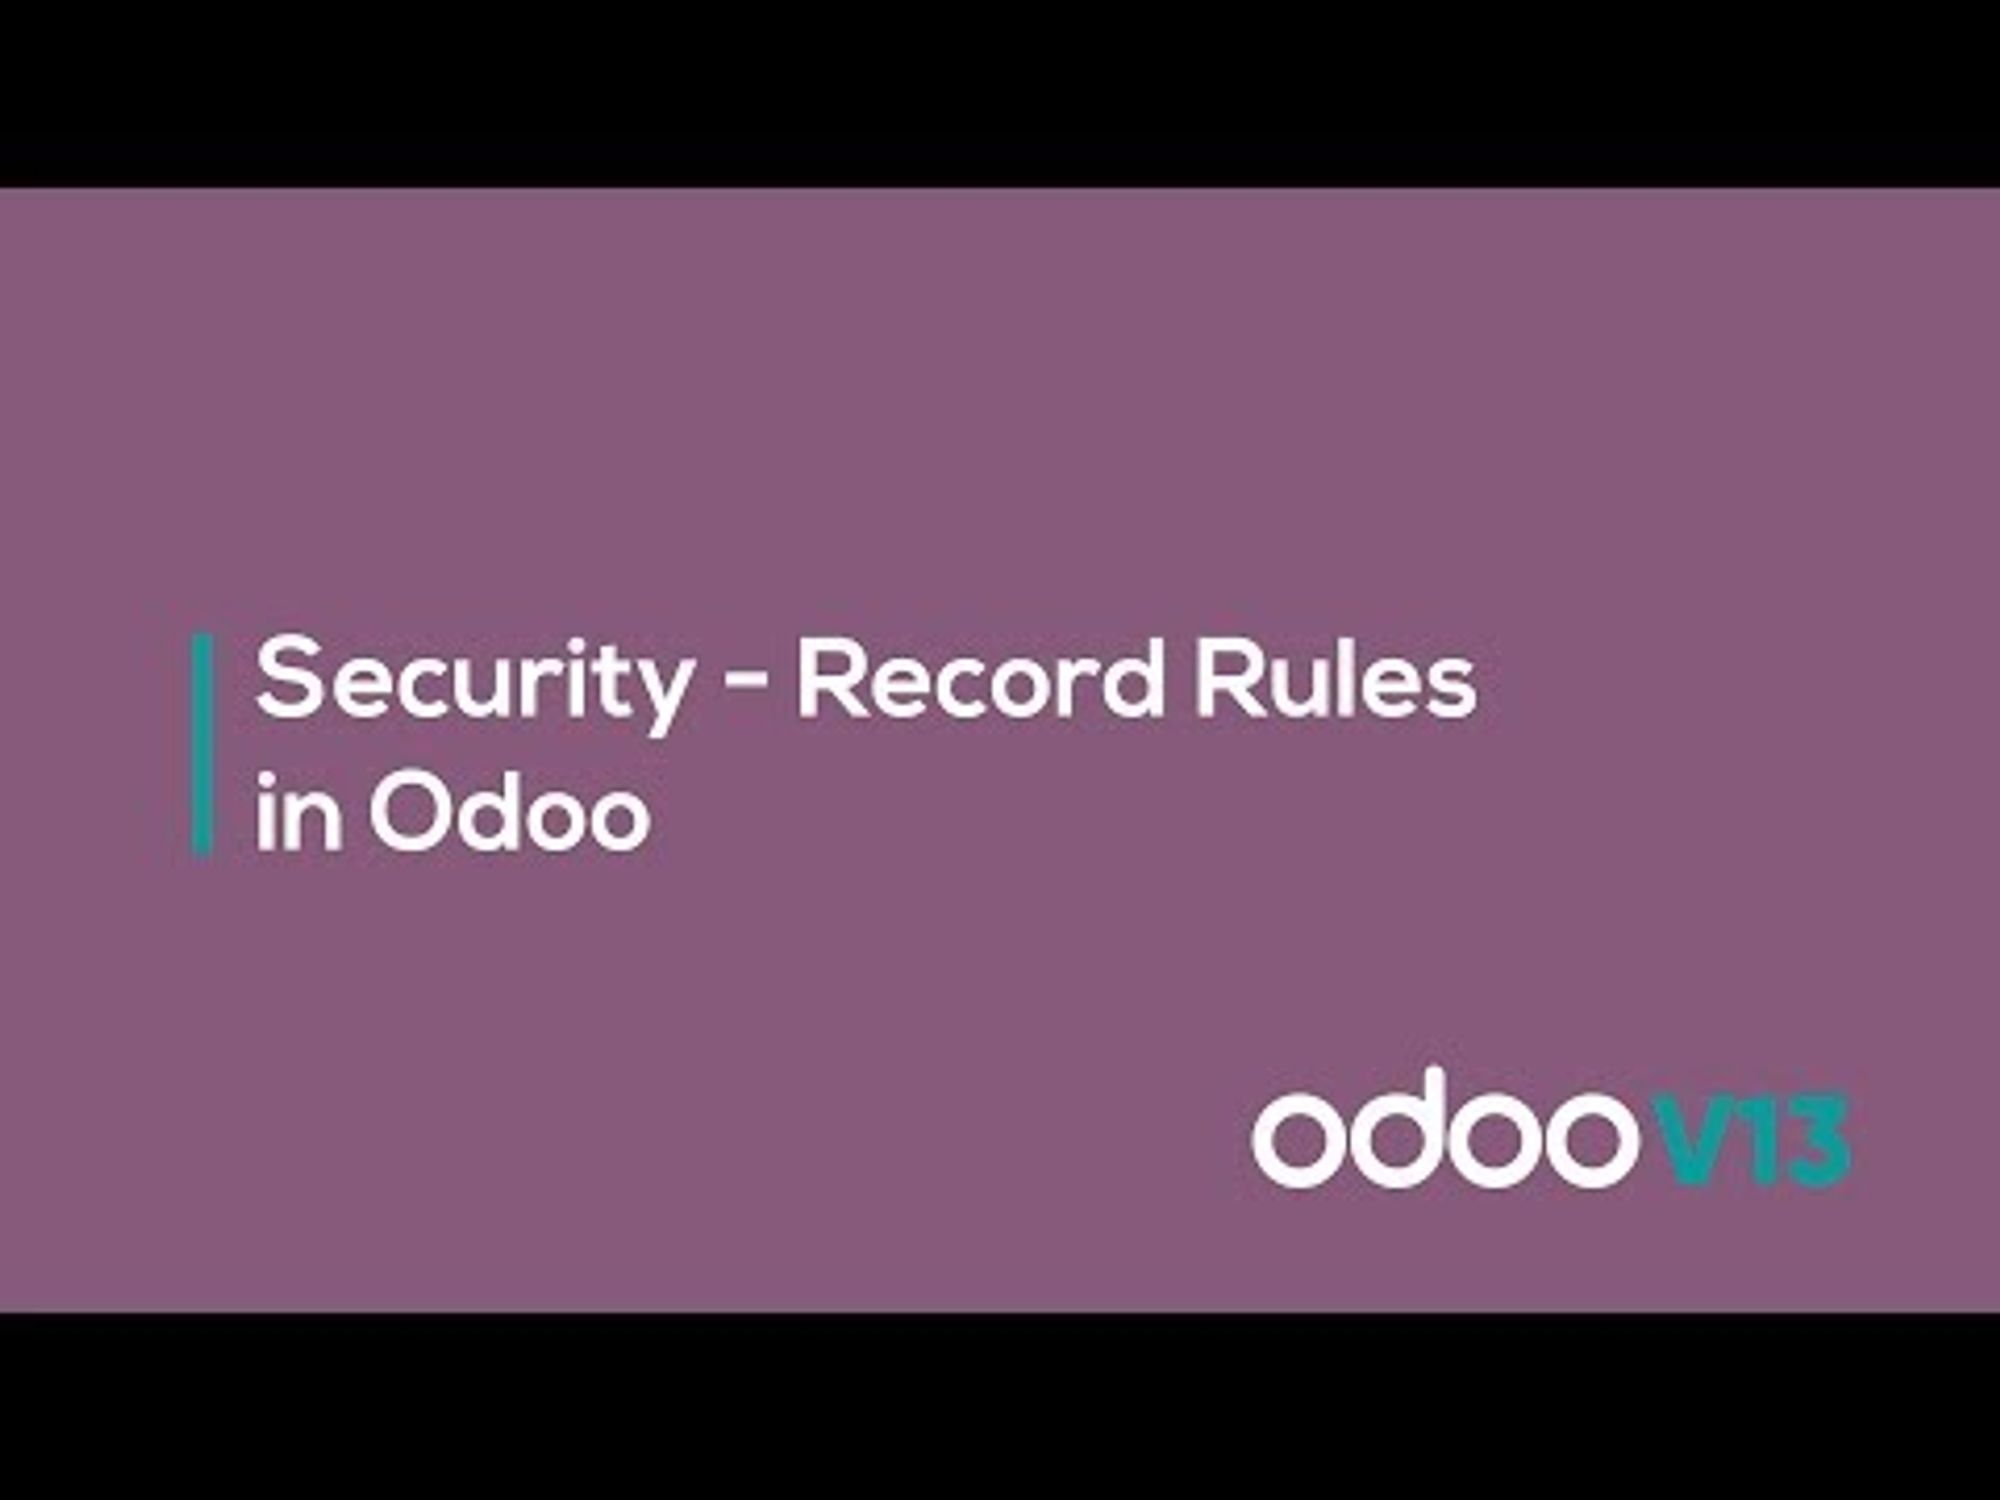 Security - Record Rules in Odoo